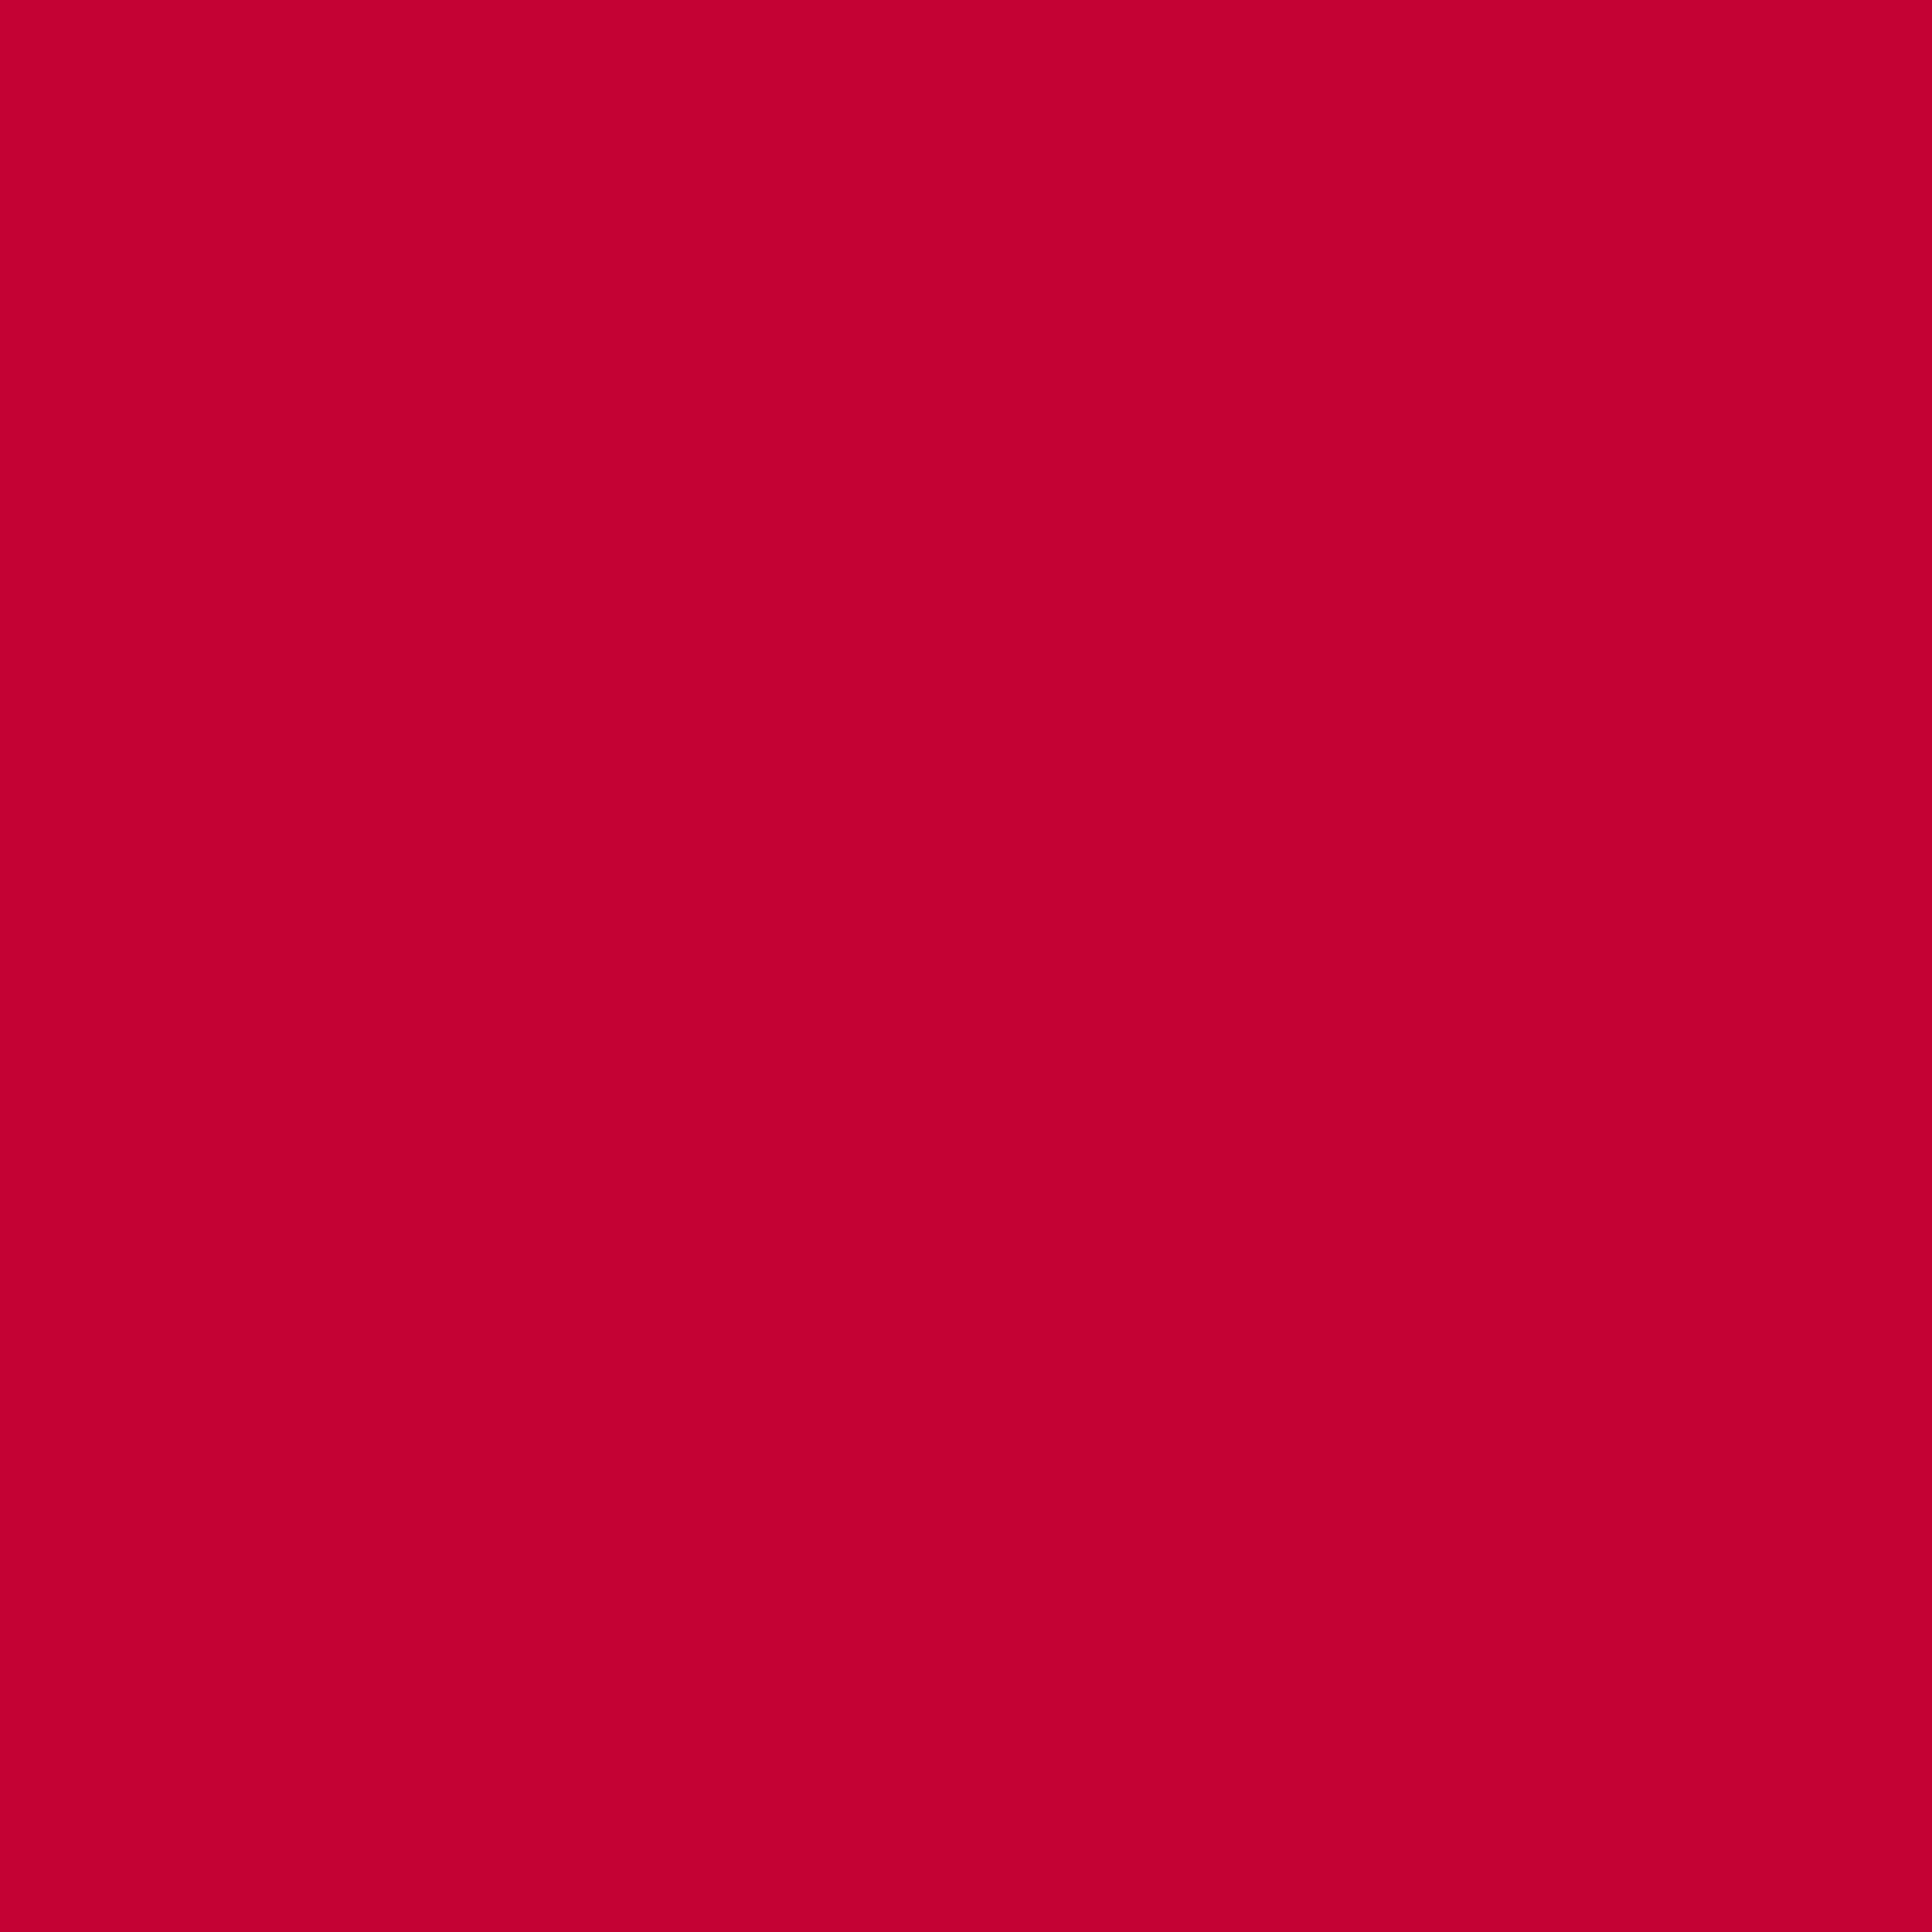 3600x3600 Red NCS Solid Color Background